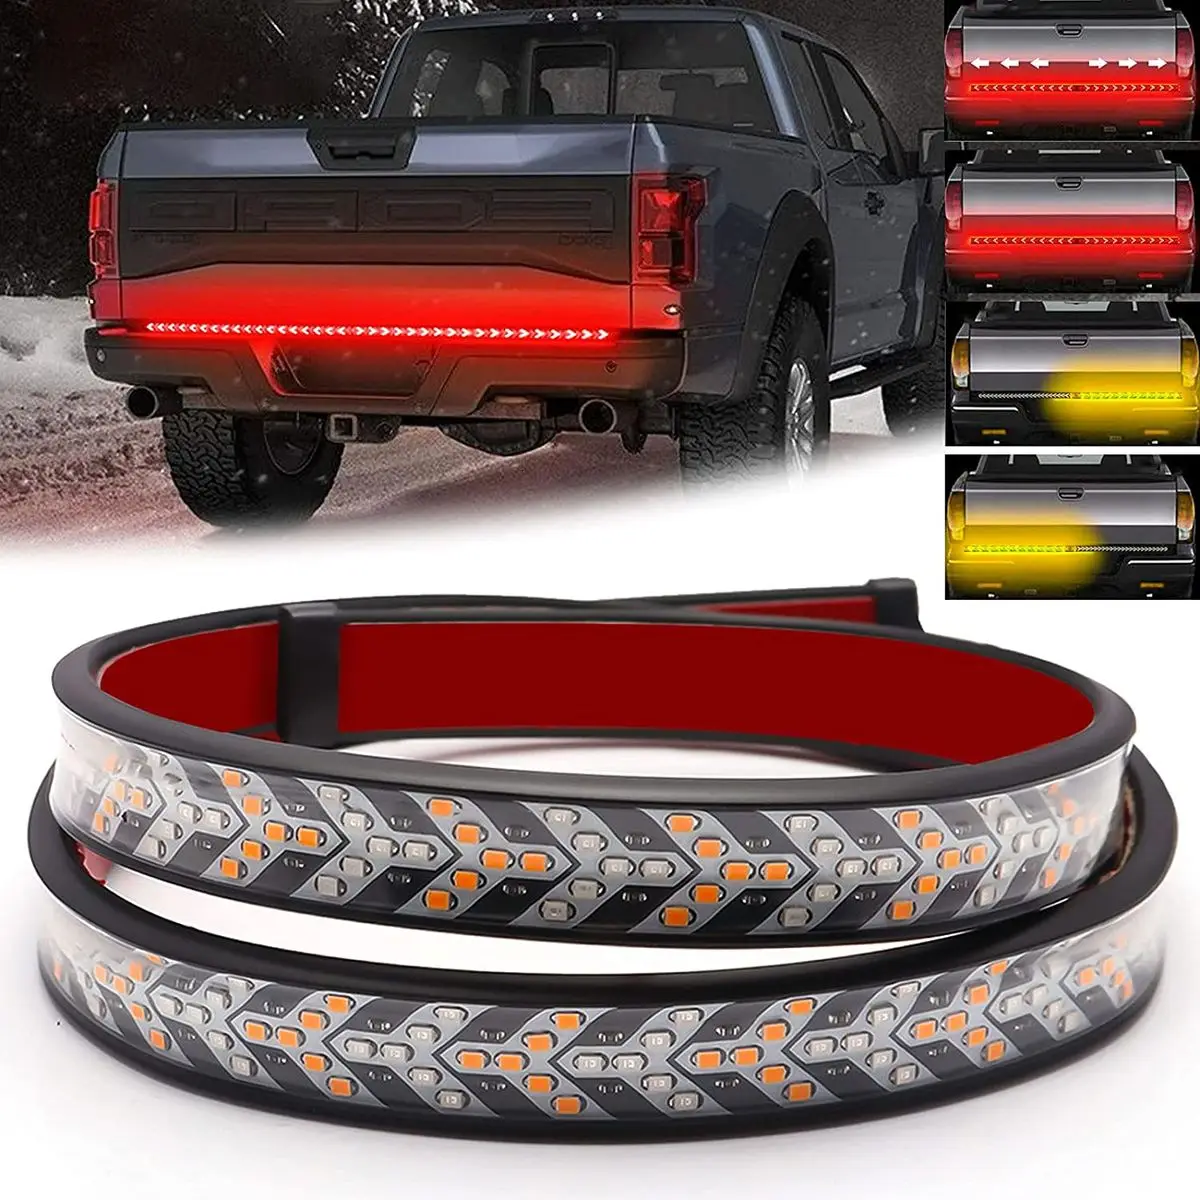 

150cm Multi-Functions 5 Rows 432pcs SMD LED Chips LED Tailgate Strip Light Bar For Ford Pickup Truck